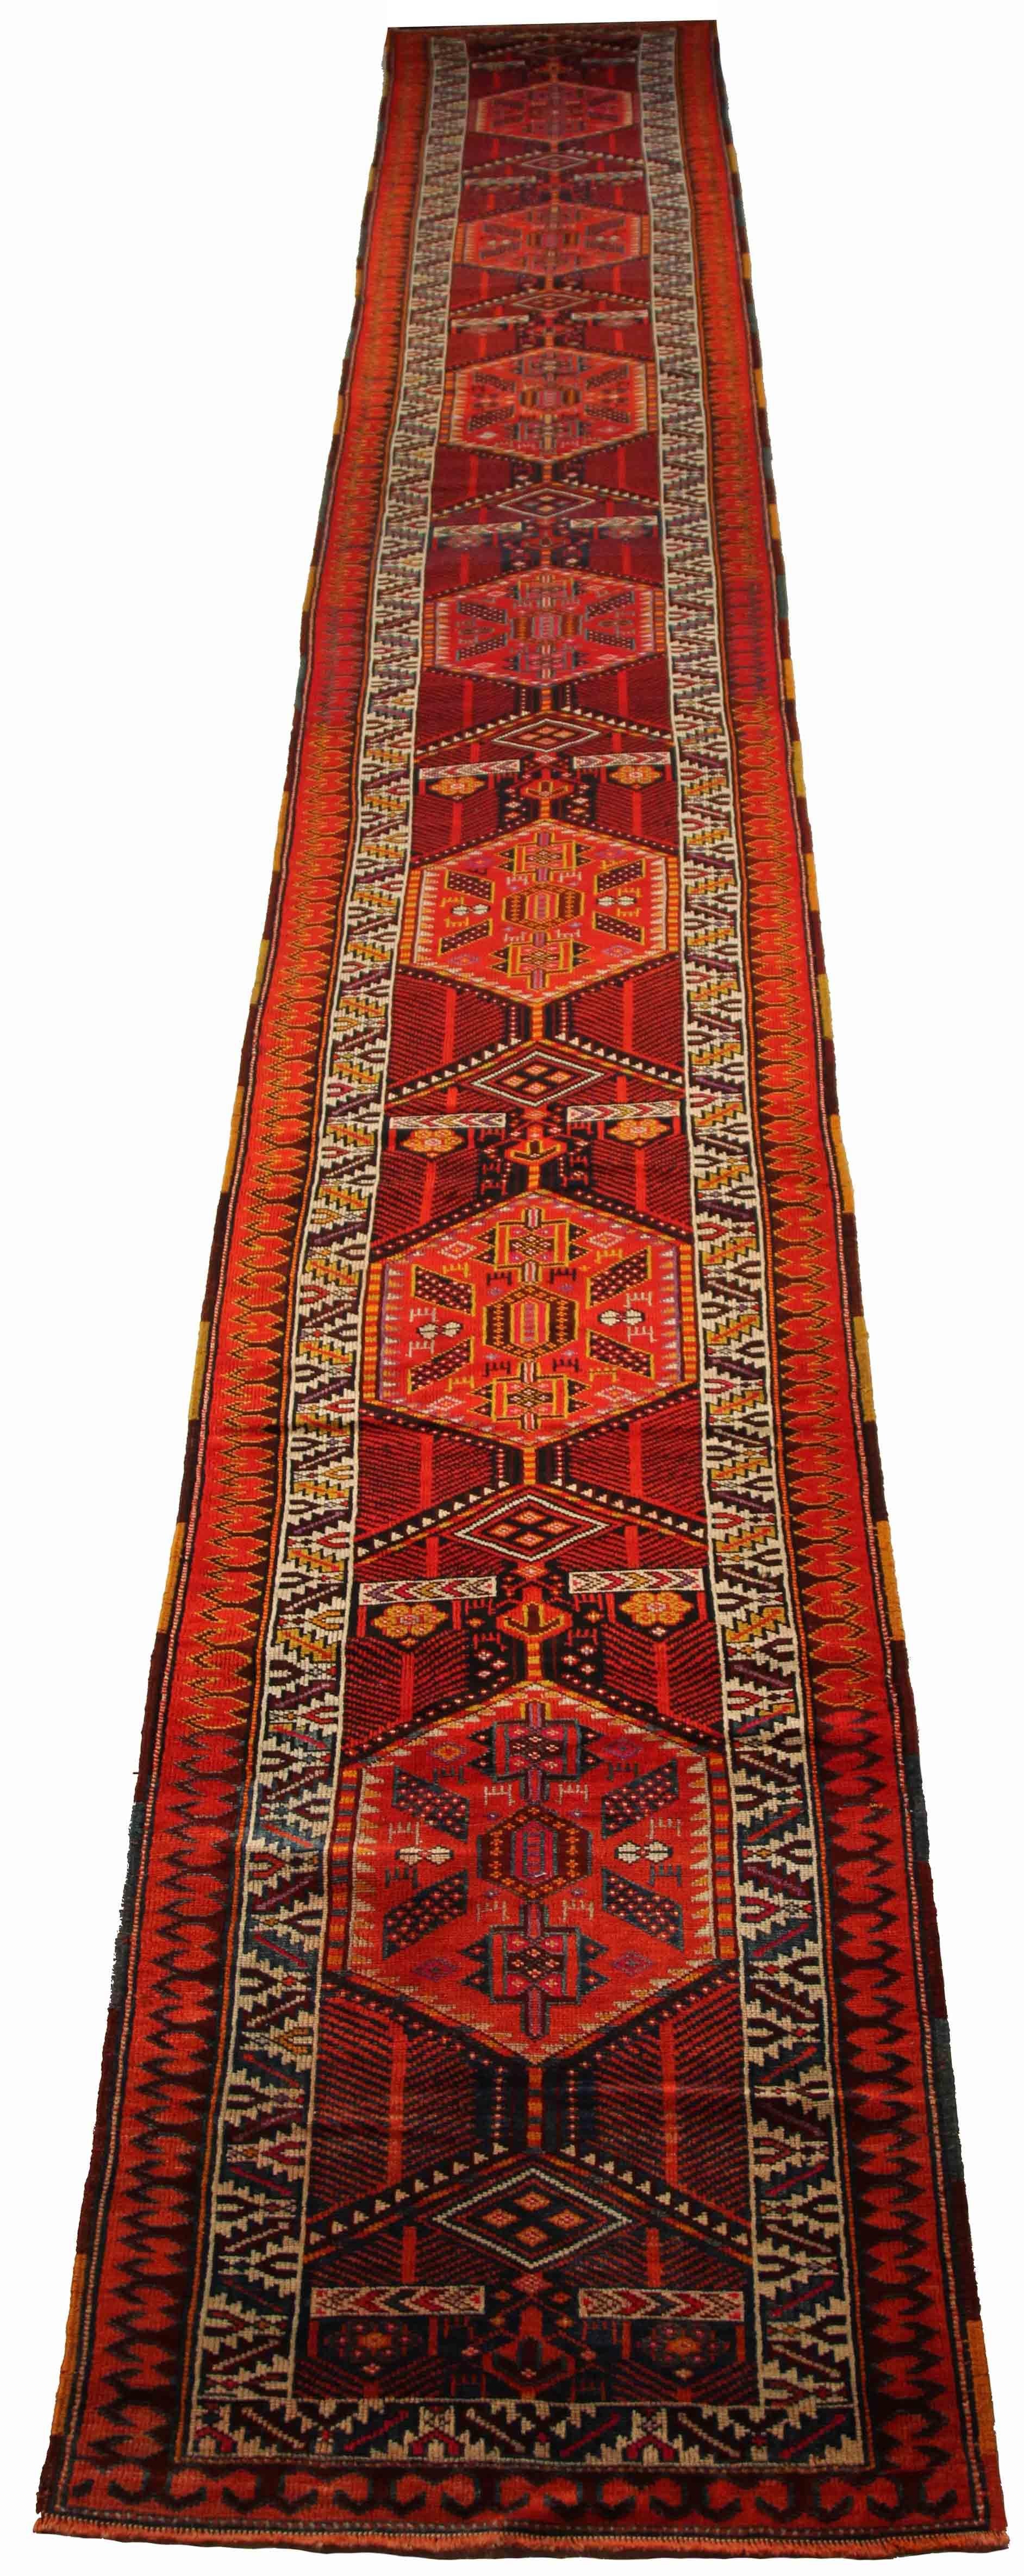 Antique Persian Rug with Tribal Design and Extraordinary Length, circa 1900s In Excellent Condition For Sale In Dallas, TX